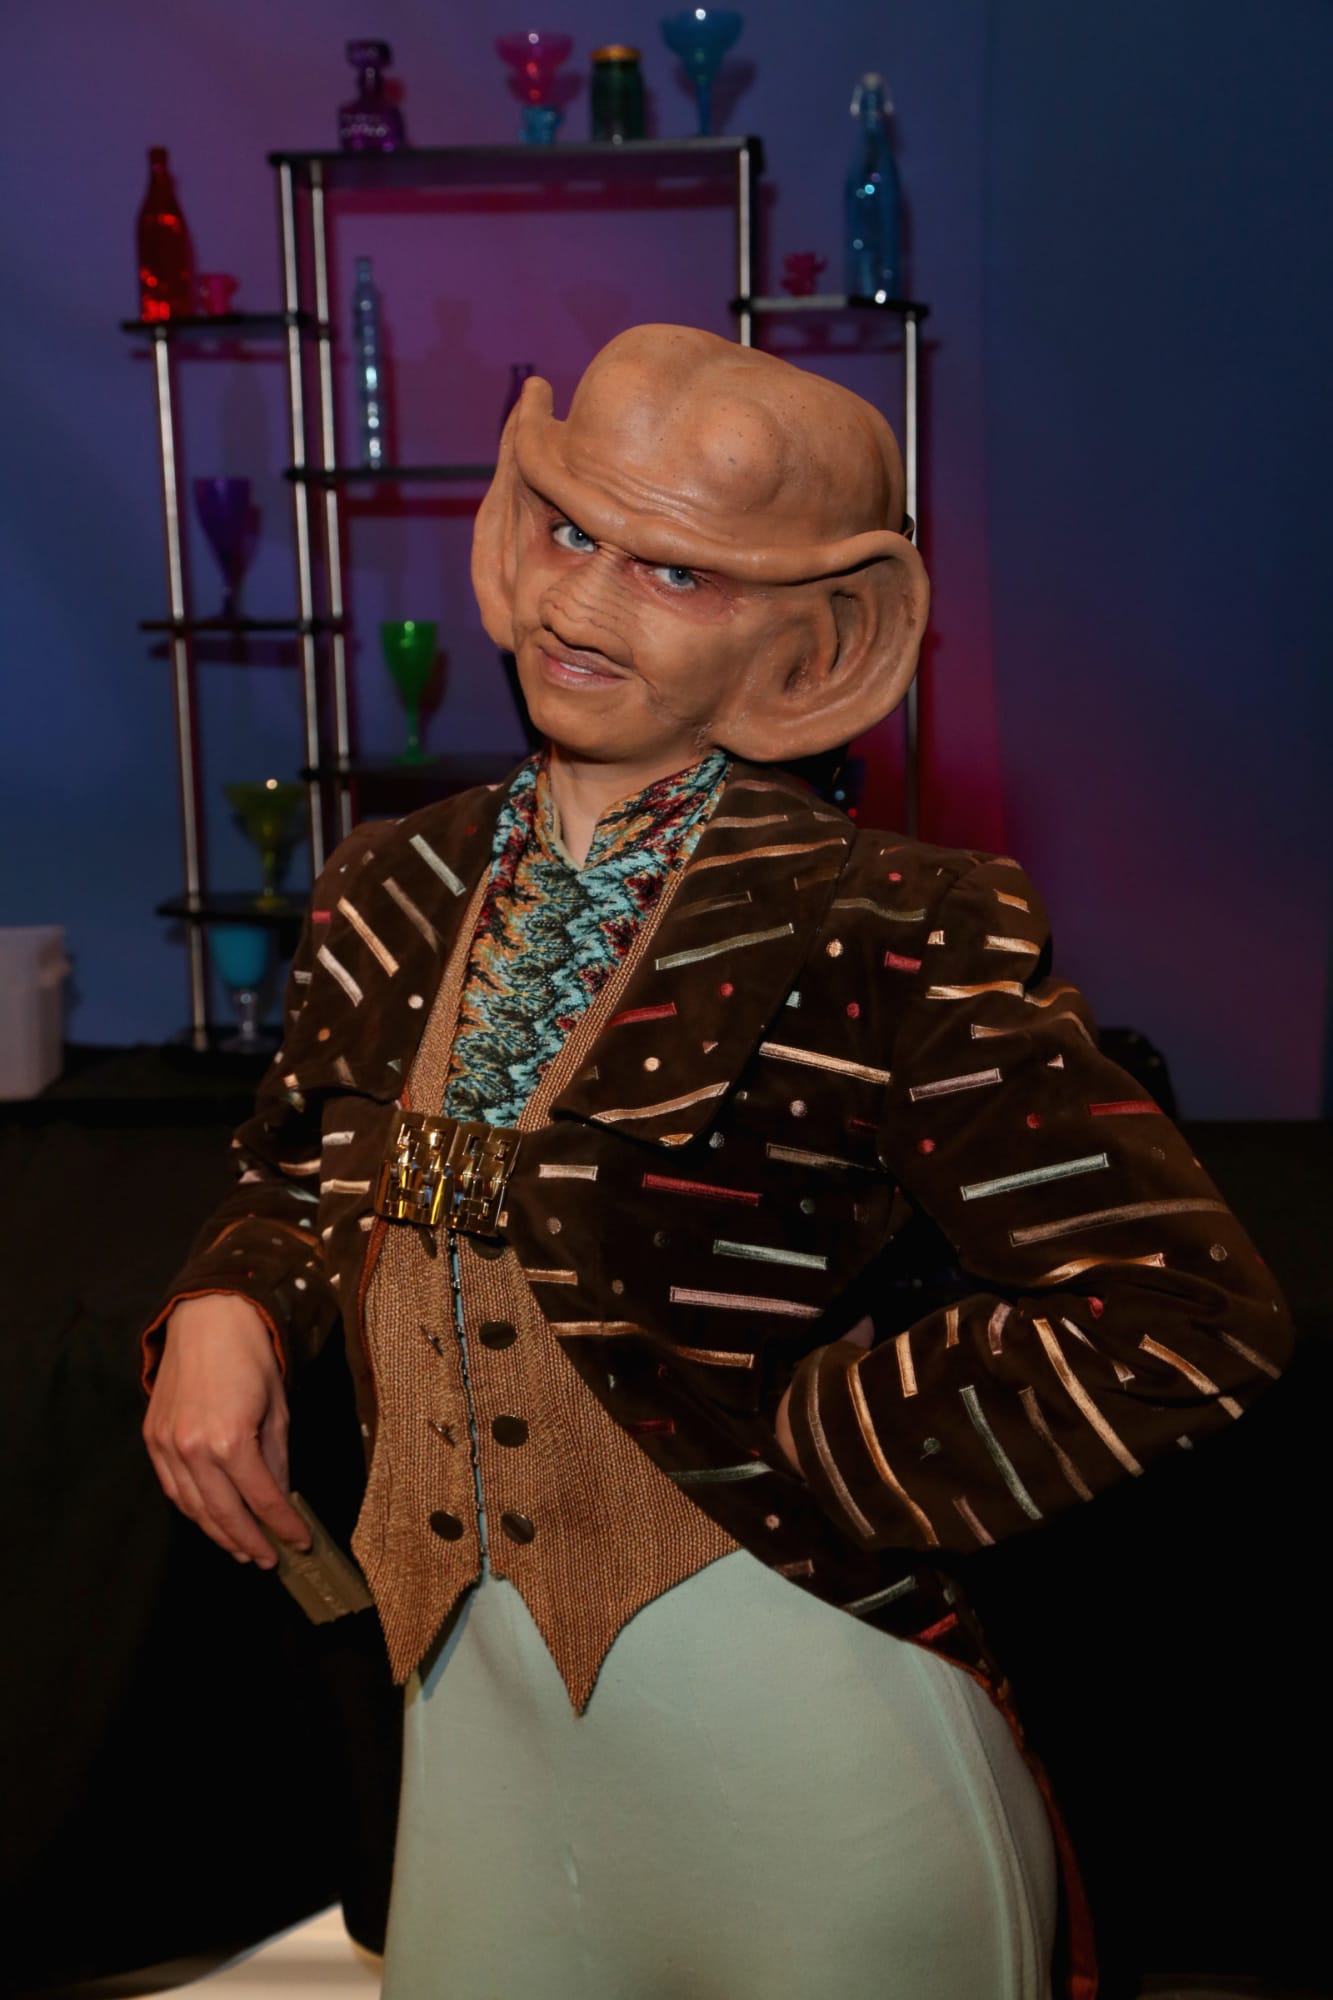 Did you know? Ferengi Fridays are on Linkedin